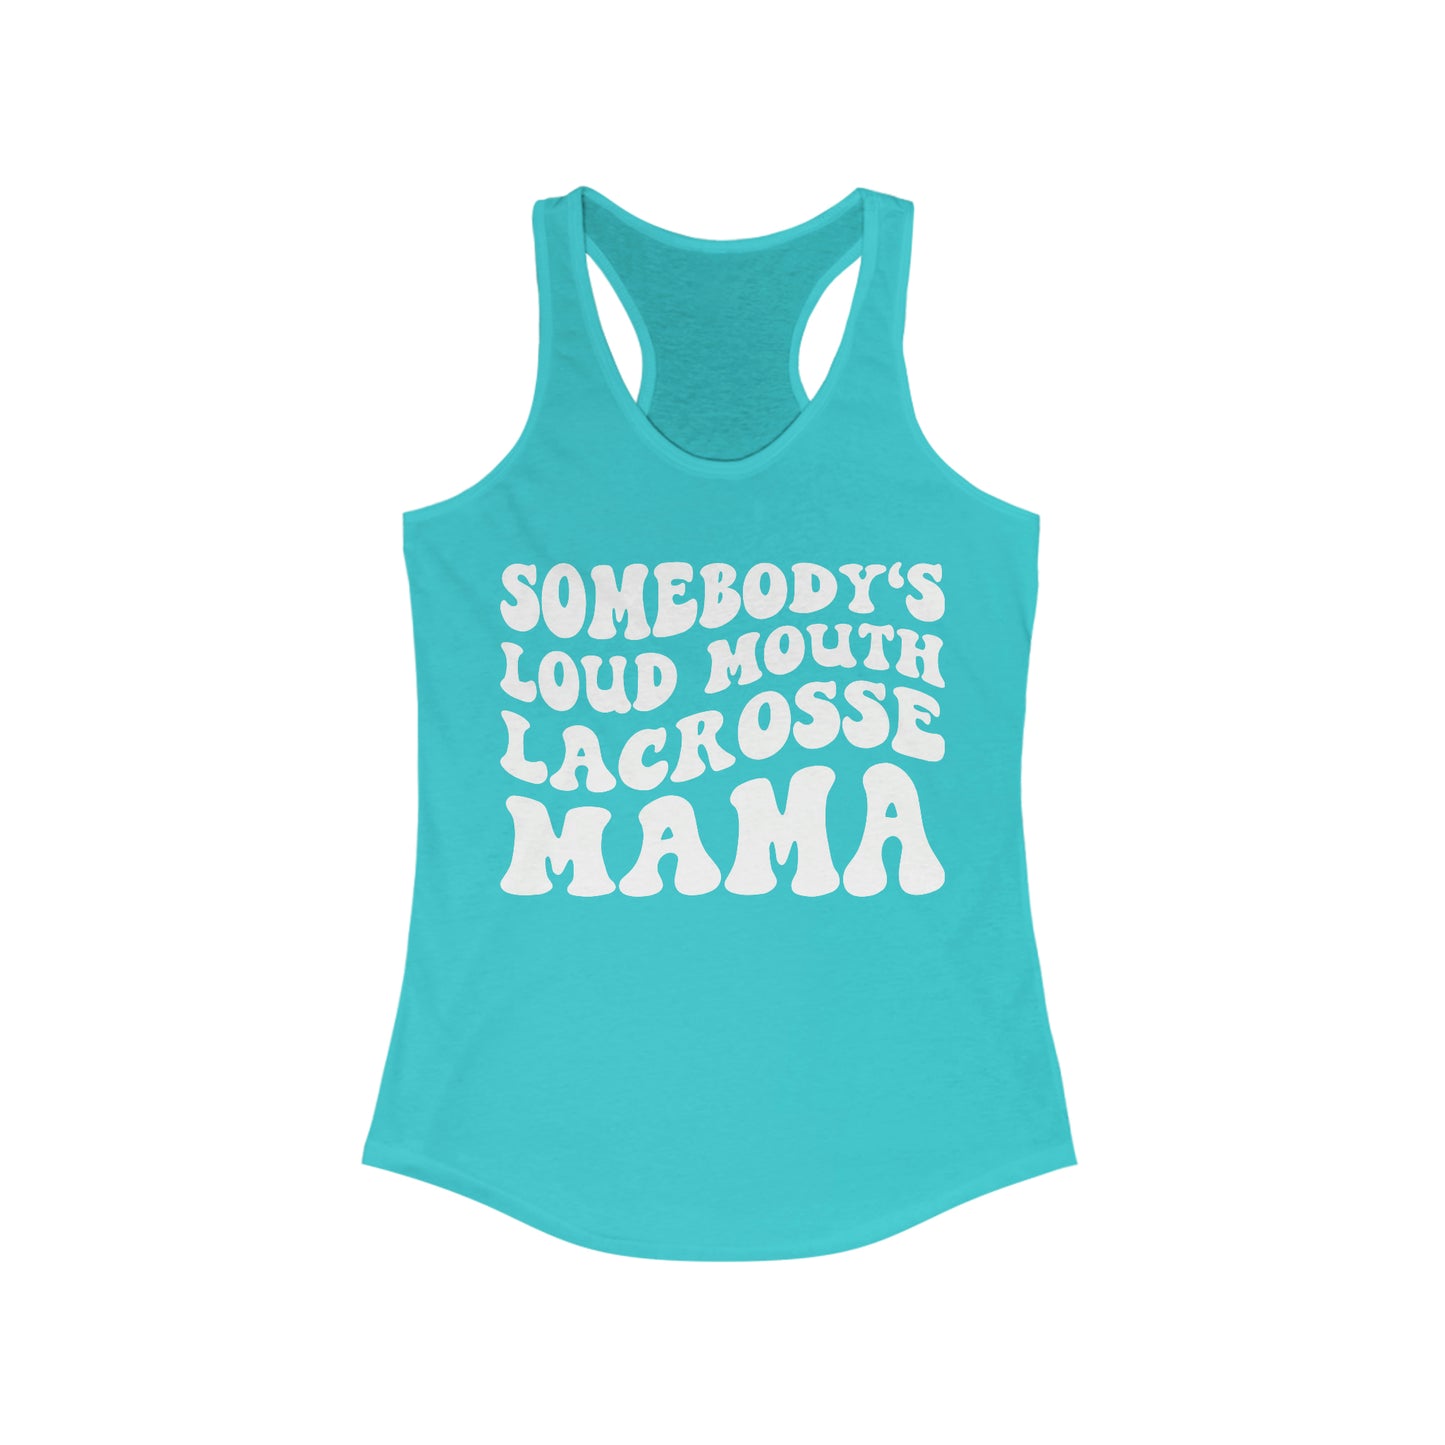 Somebody's Loud Mouth Lacrosse Mom Tank